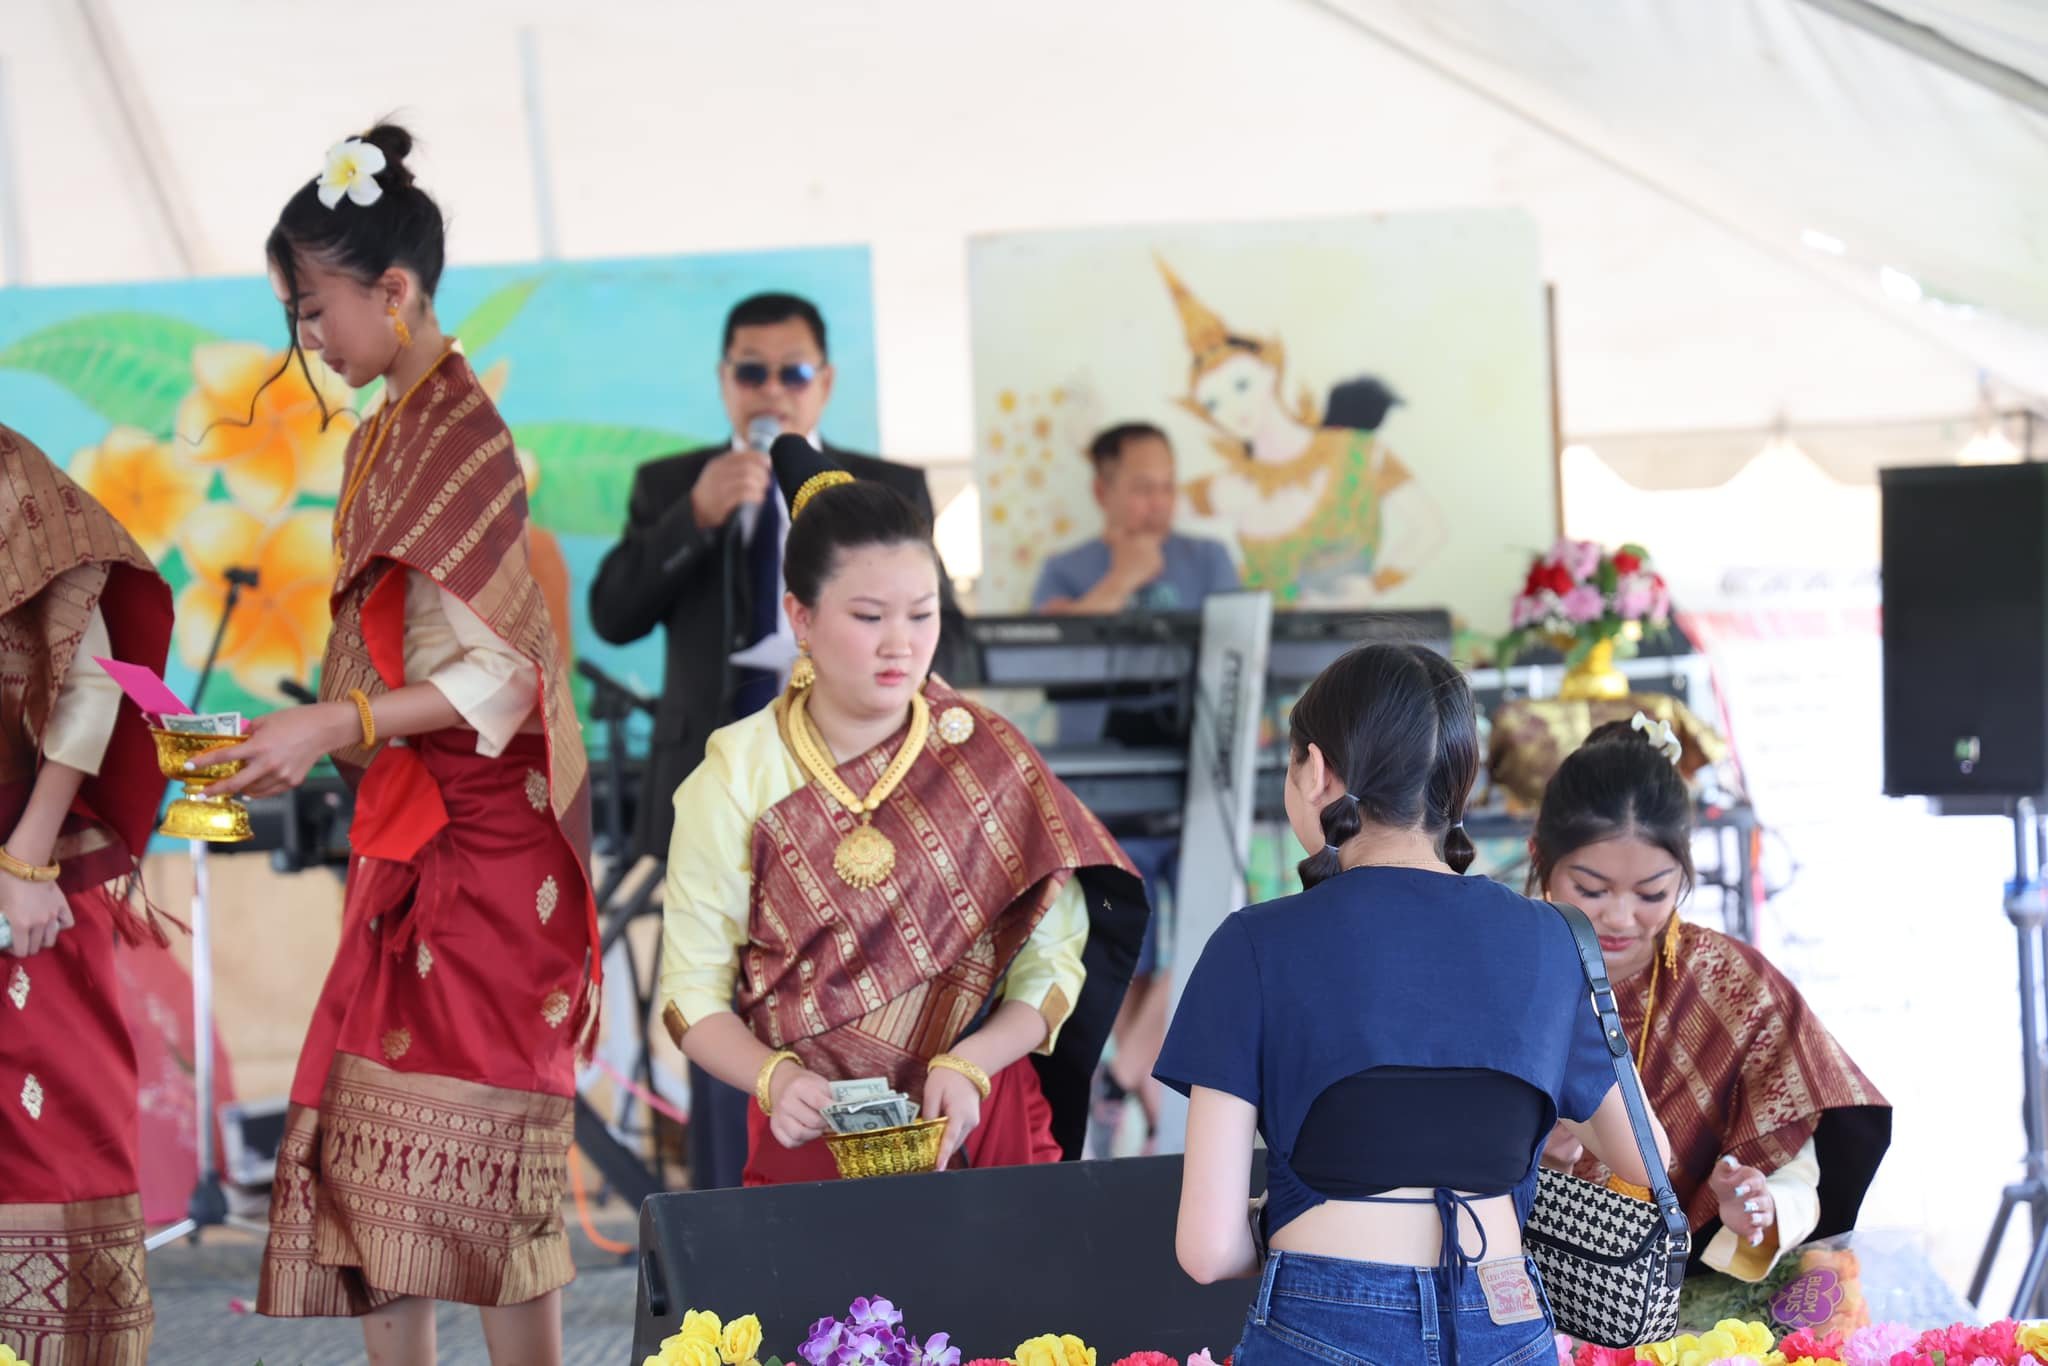 Contributions that empower the Lao community.